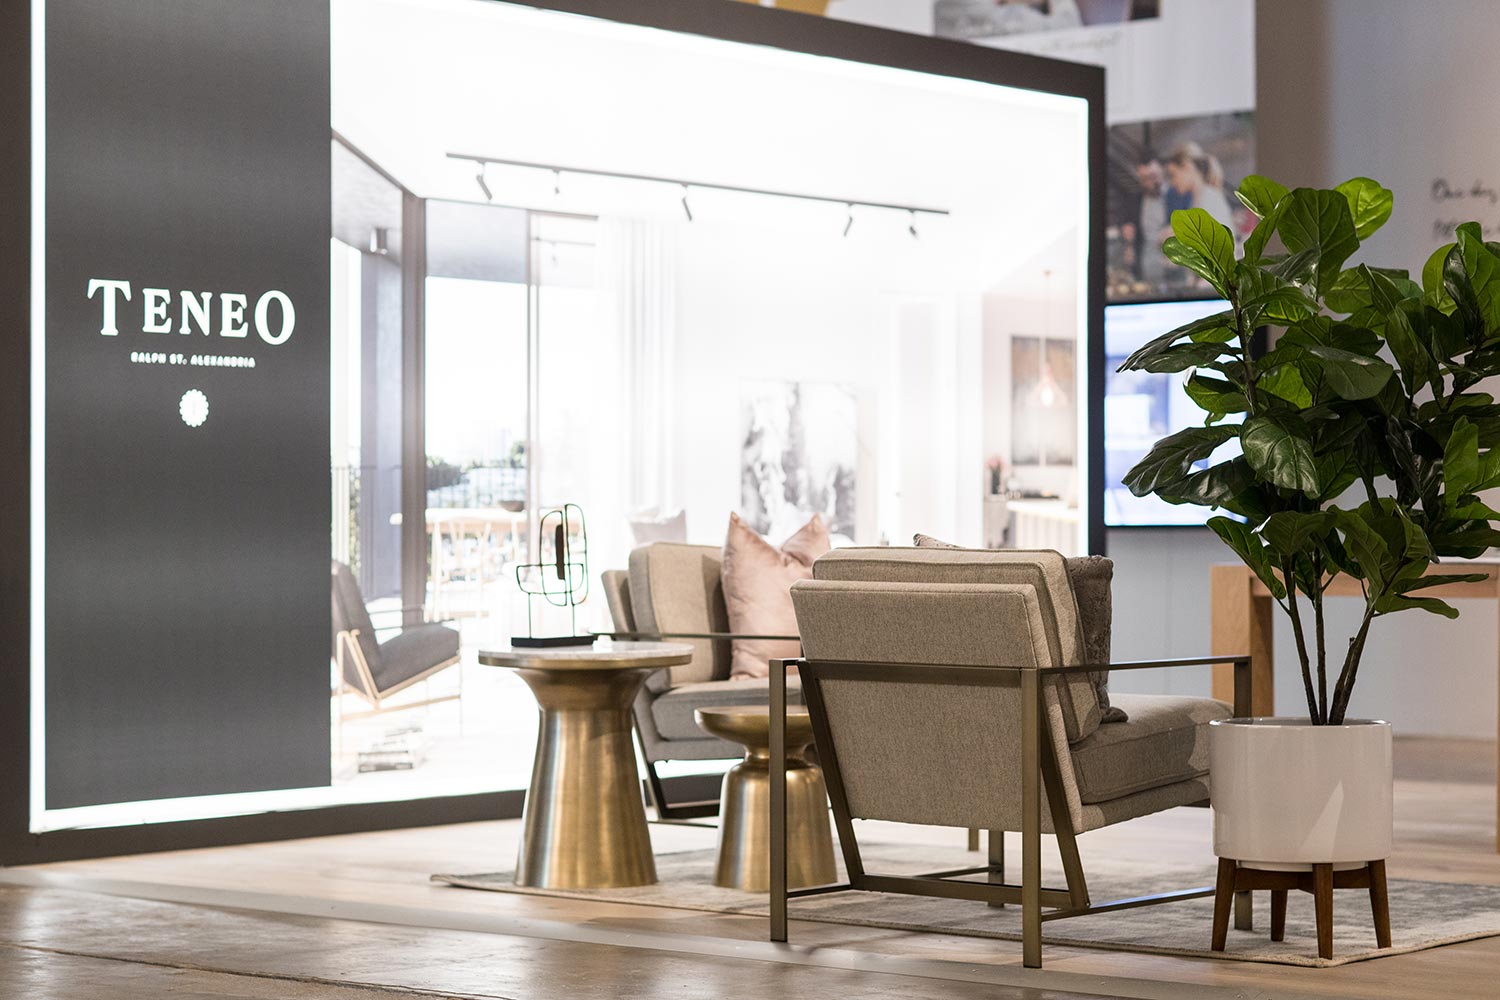 https://www.covemade.com.au/wp-content/uploads/2021/05/Toast_Teneo-Display-Suite_Interior-Shoot_DS-OFICINA_High-Res-9968.jpg